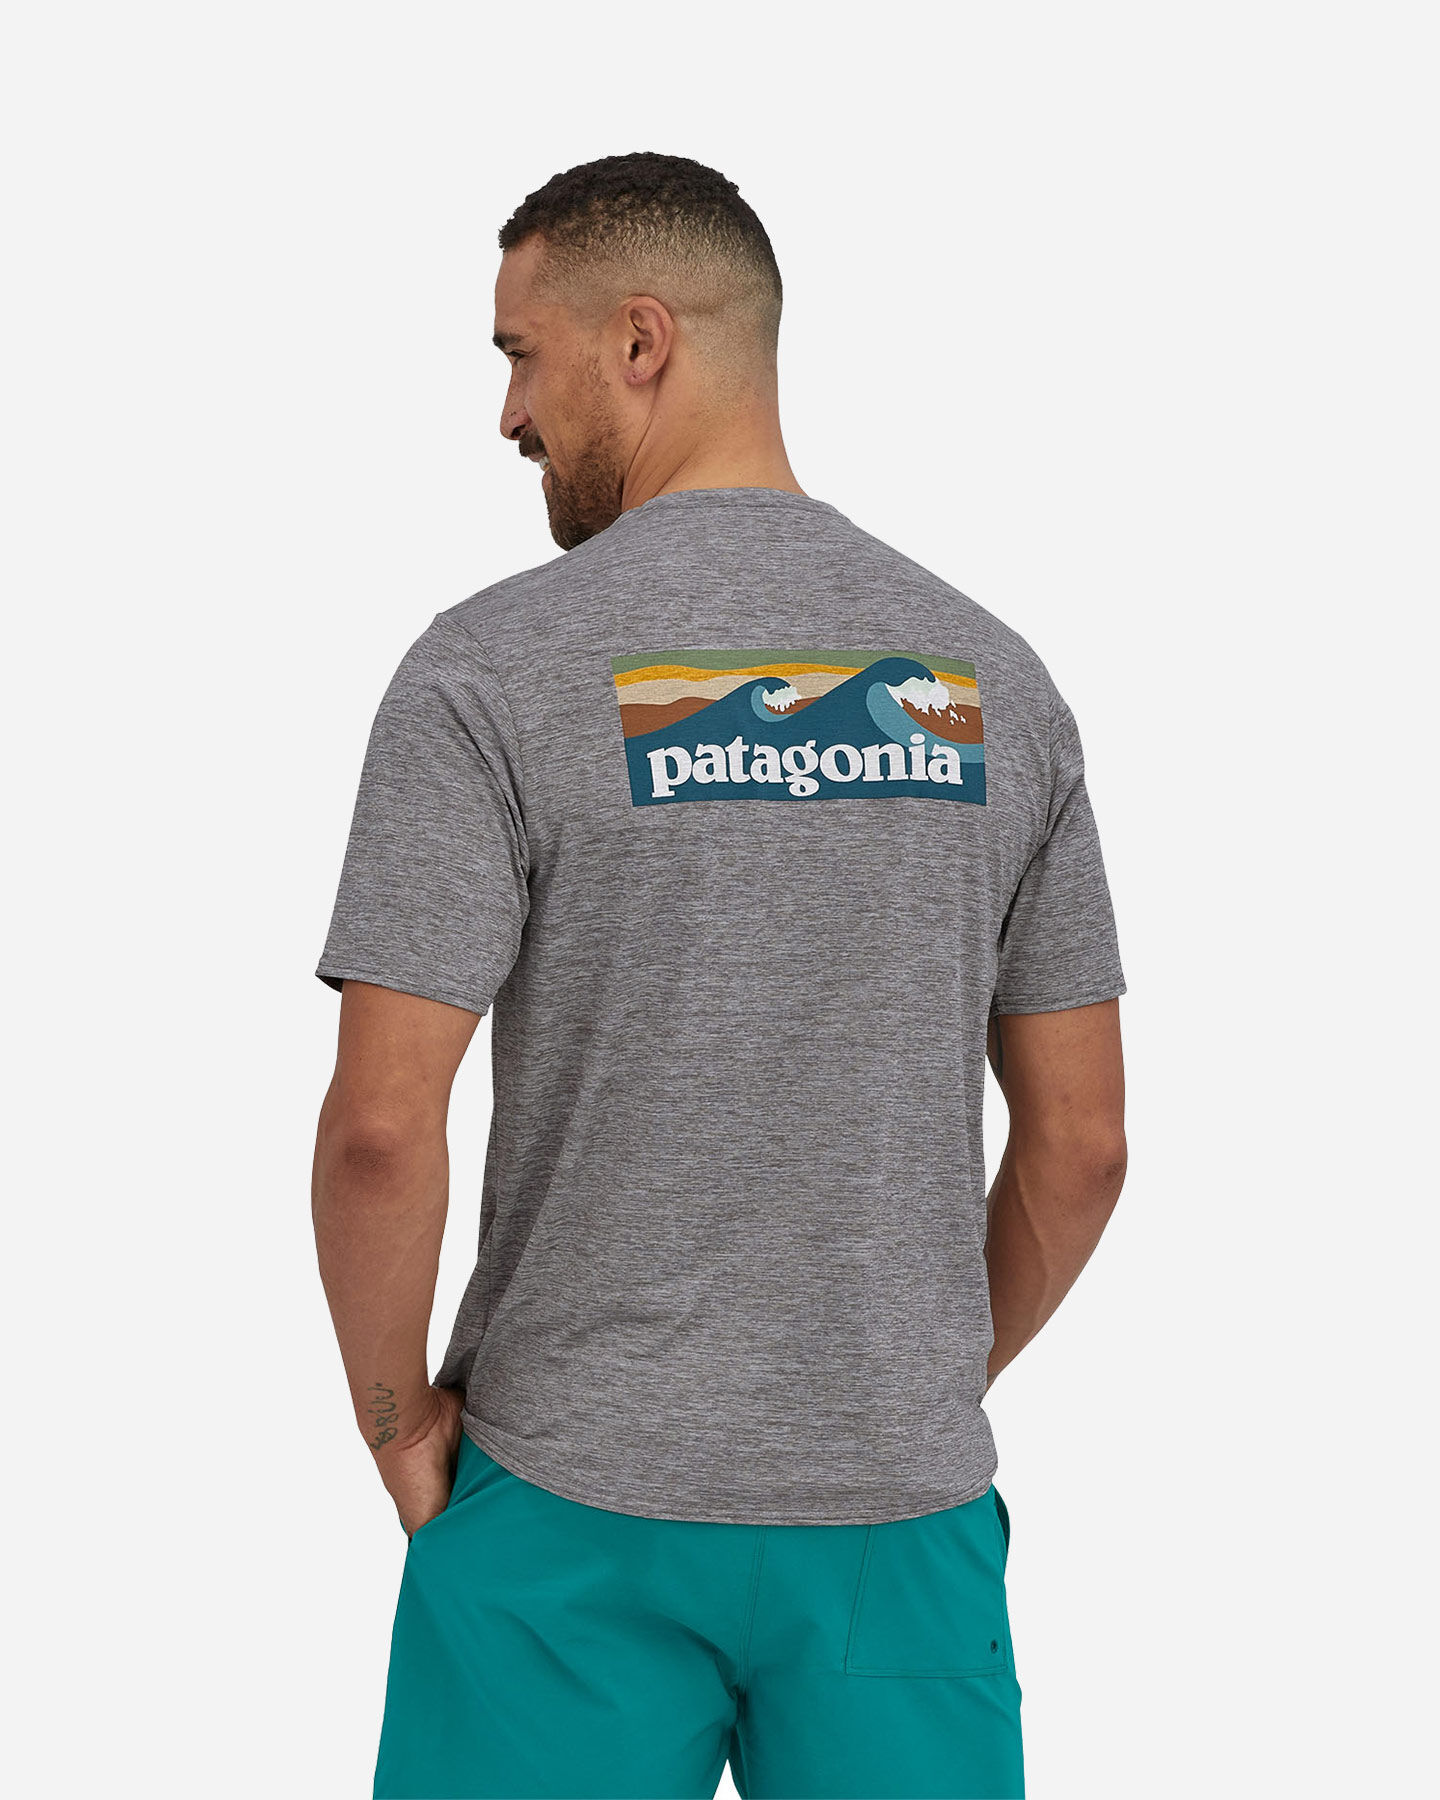  T-Shirt PATAGONIA COOL DAILY GRAPHIC M S4103410|BLAF|S scatto 3